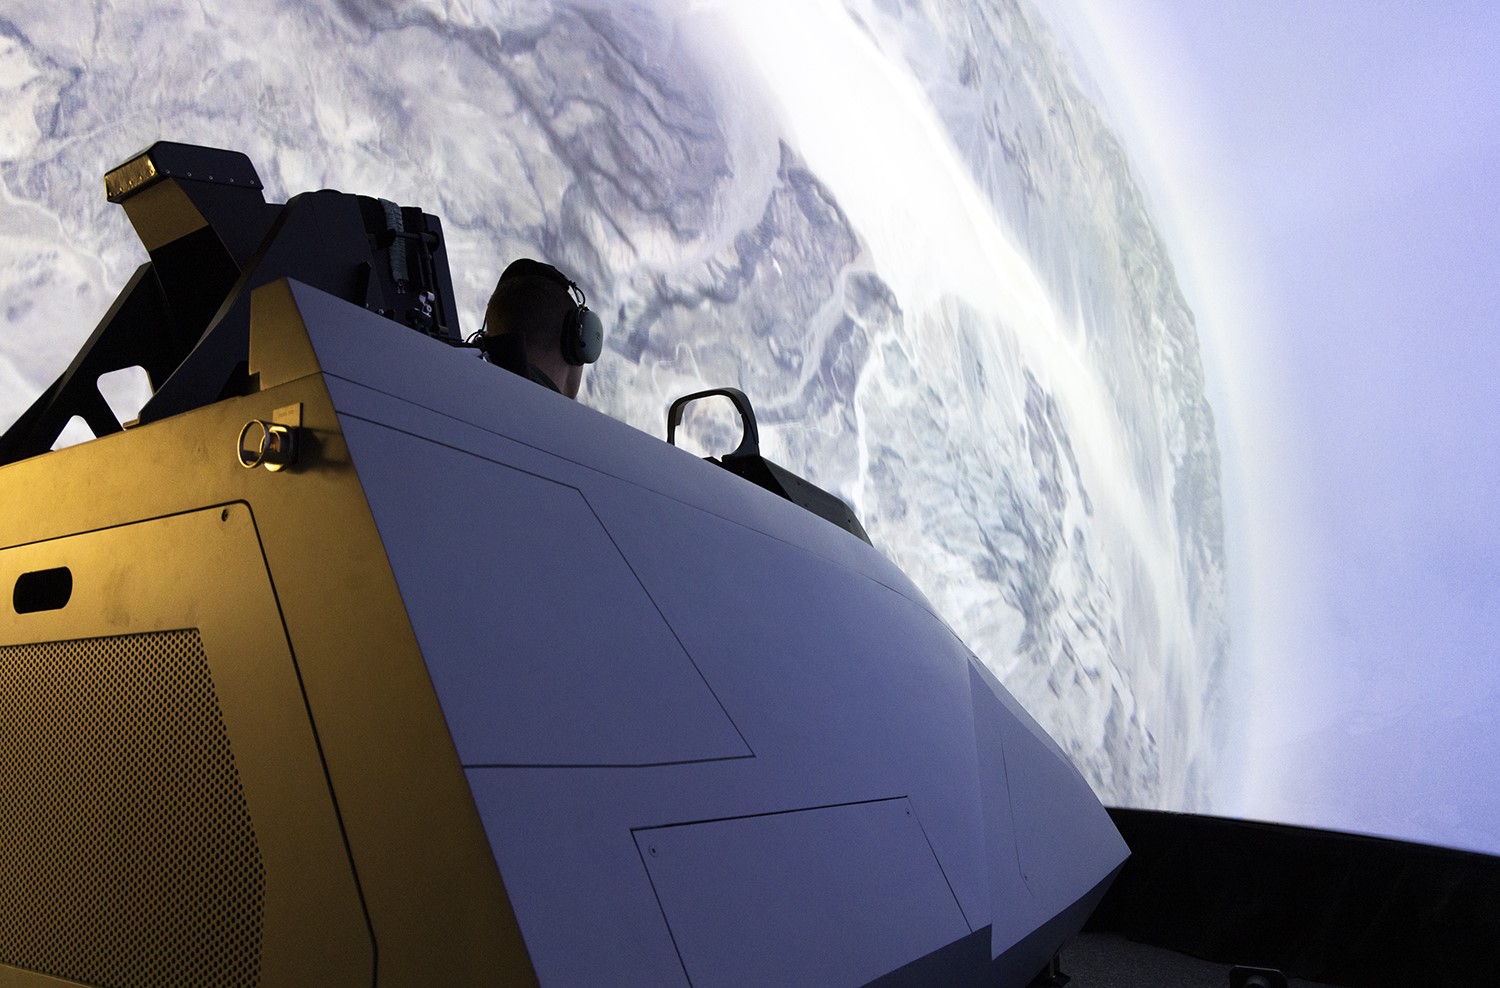 A pilot tests a U.S. Air Force F-22 Raptor cockpit simulator headed for installation in the Naval Air Warfare Center Aircraft Division’s Joint Simulation Environment. The Navy installed a division of four Raptor cockpits alongside a division of eight F-35 Lightning cockpits in its advanced tactical trainer so Navy and Air Force fighter pilots can train as a joint force starting in 2024